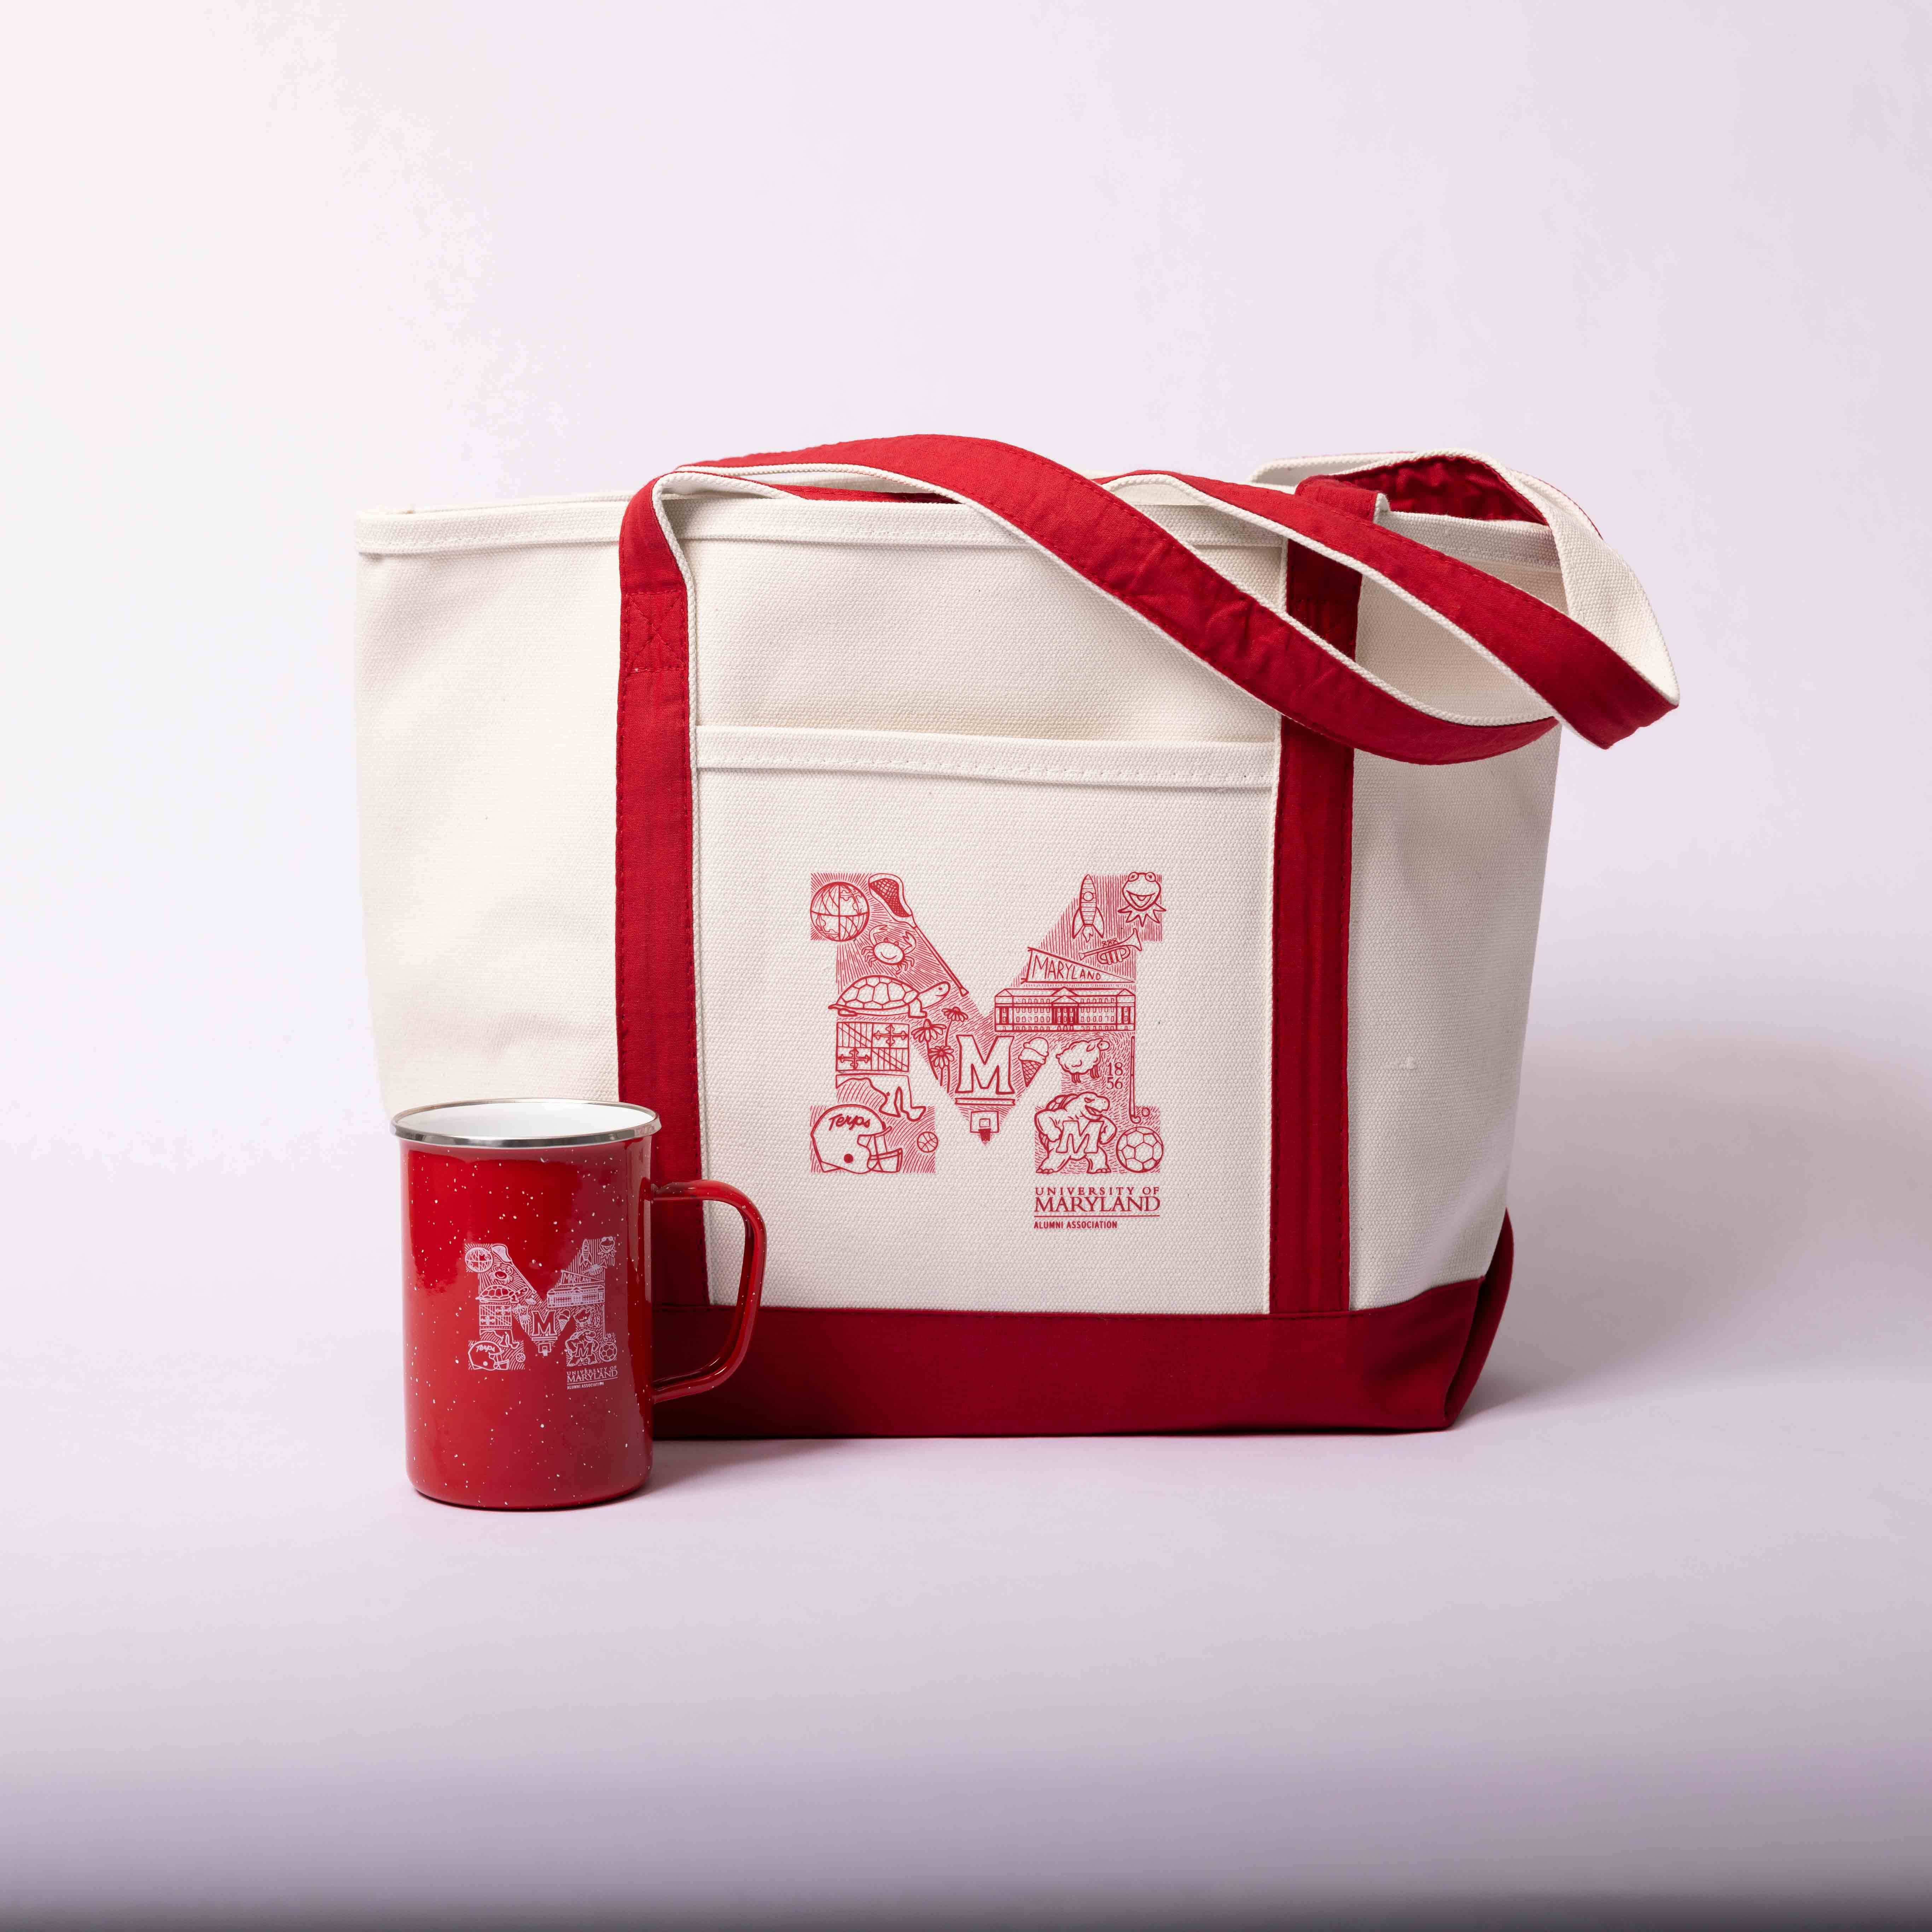 Custom mug or tote bag with the Maryland "M" comprised of iconic Maryland symbols